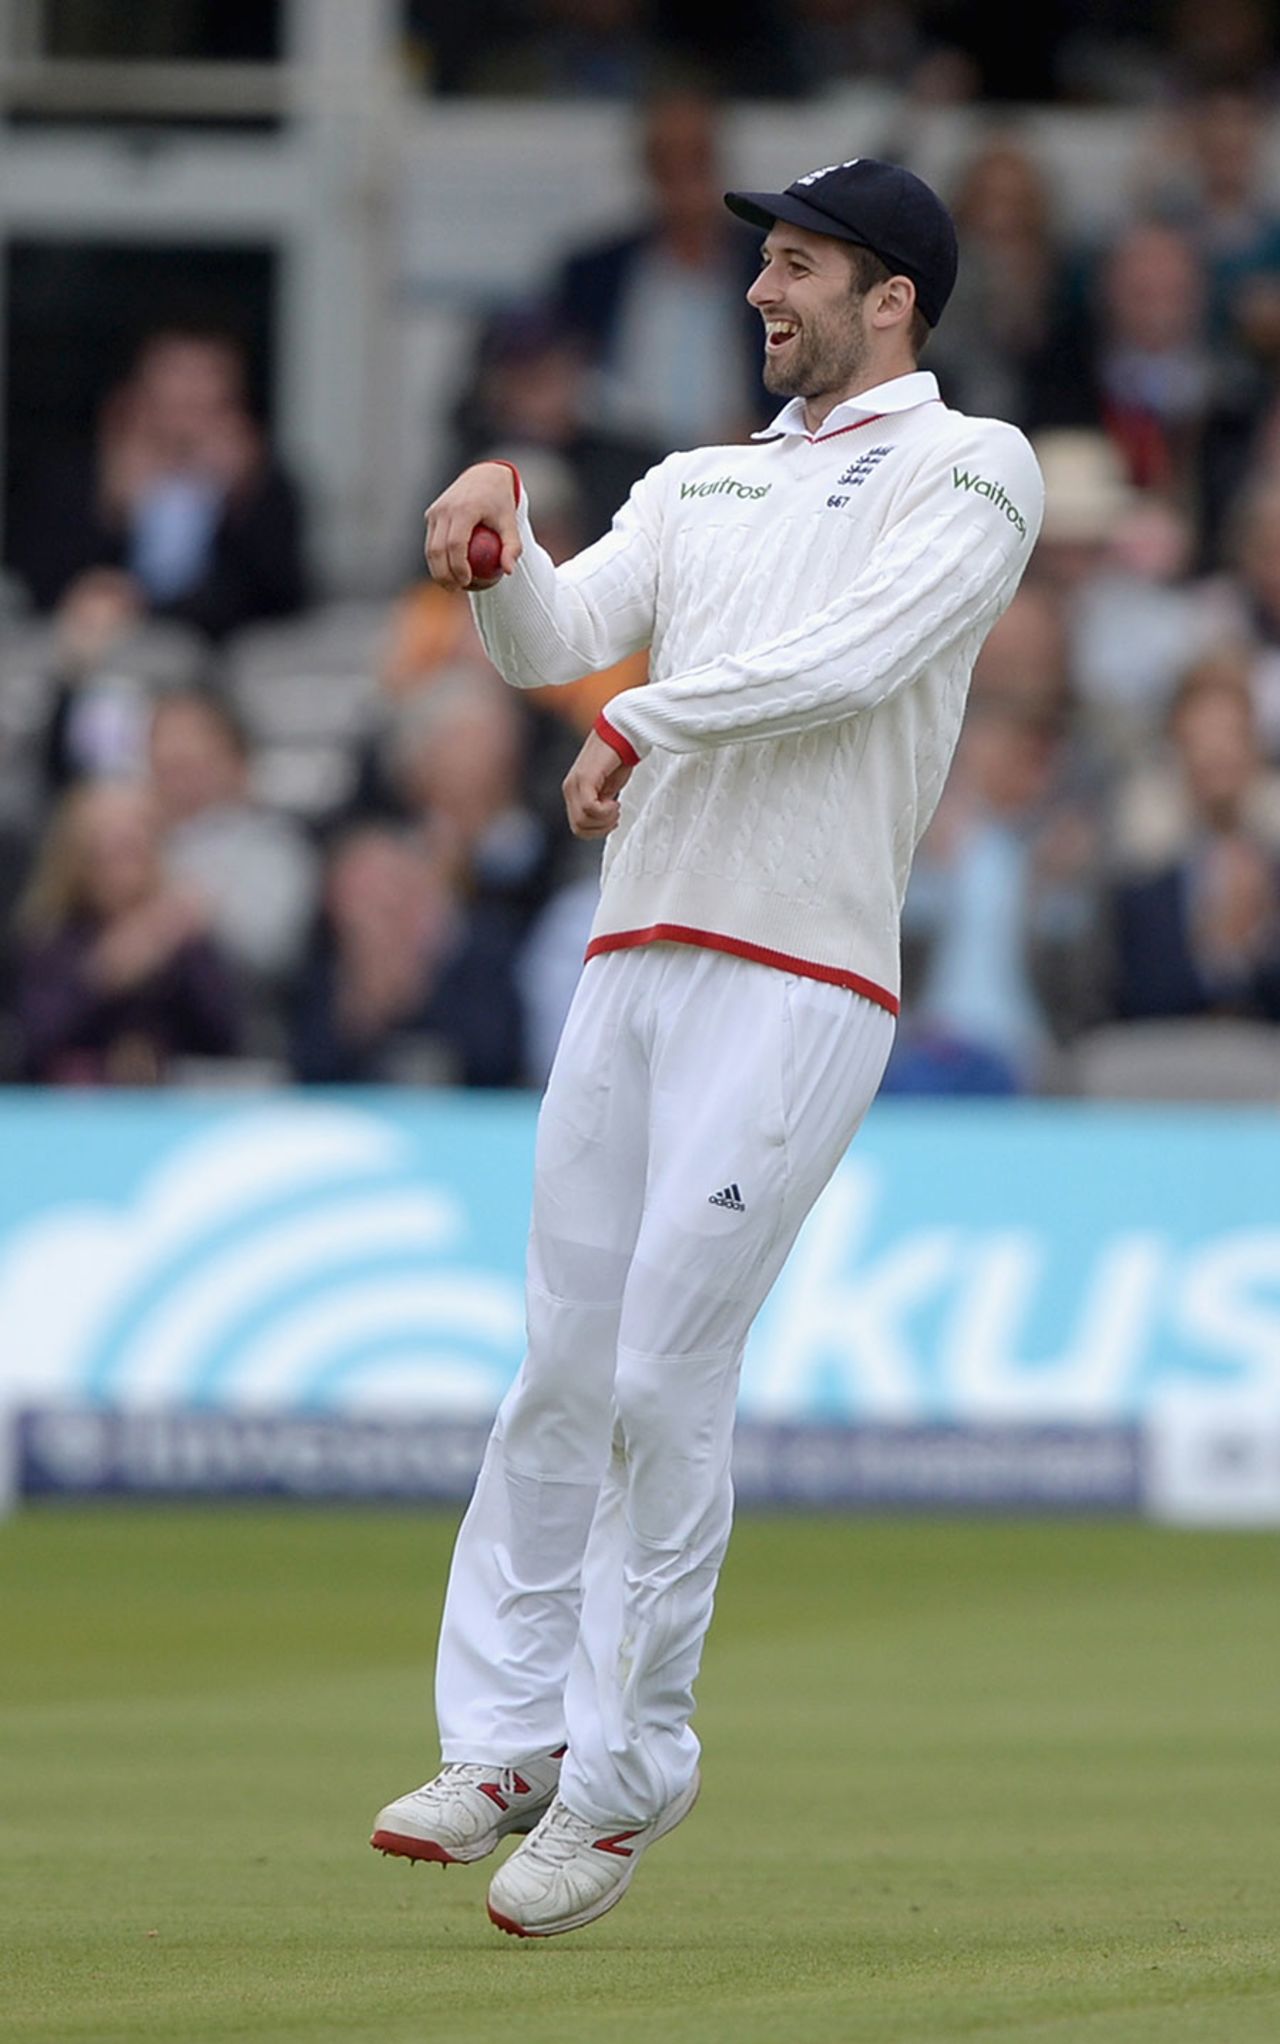 Mark Wood brought out the imaginary horse after taking a catch, England v New Zealand, 1st Investec Test, Lord's, 3rd day, May 23, 2015